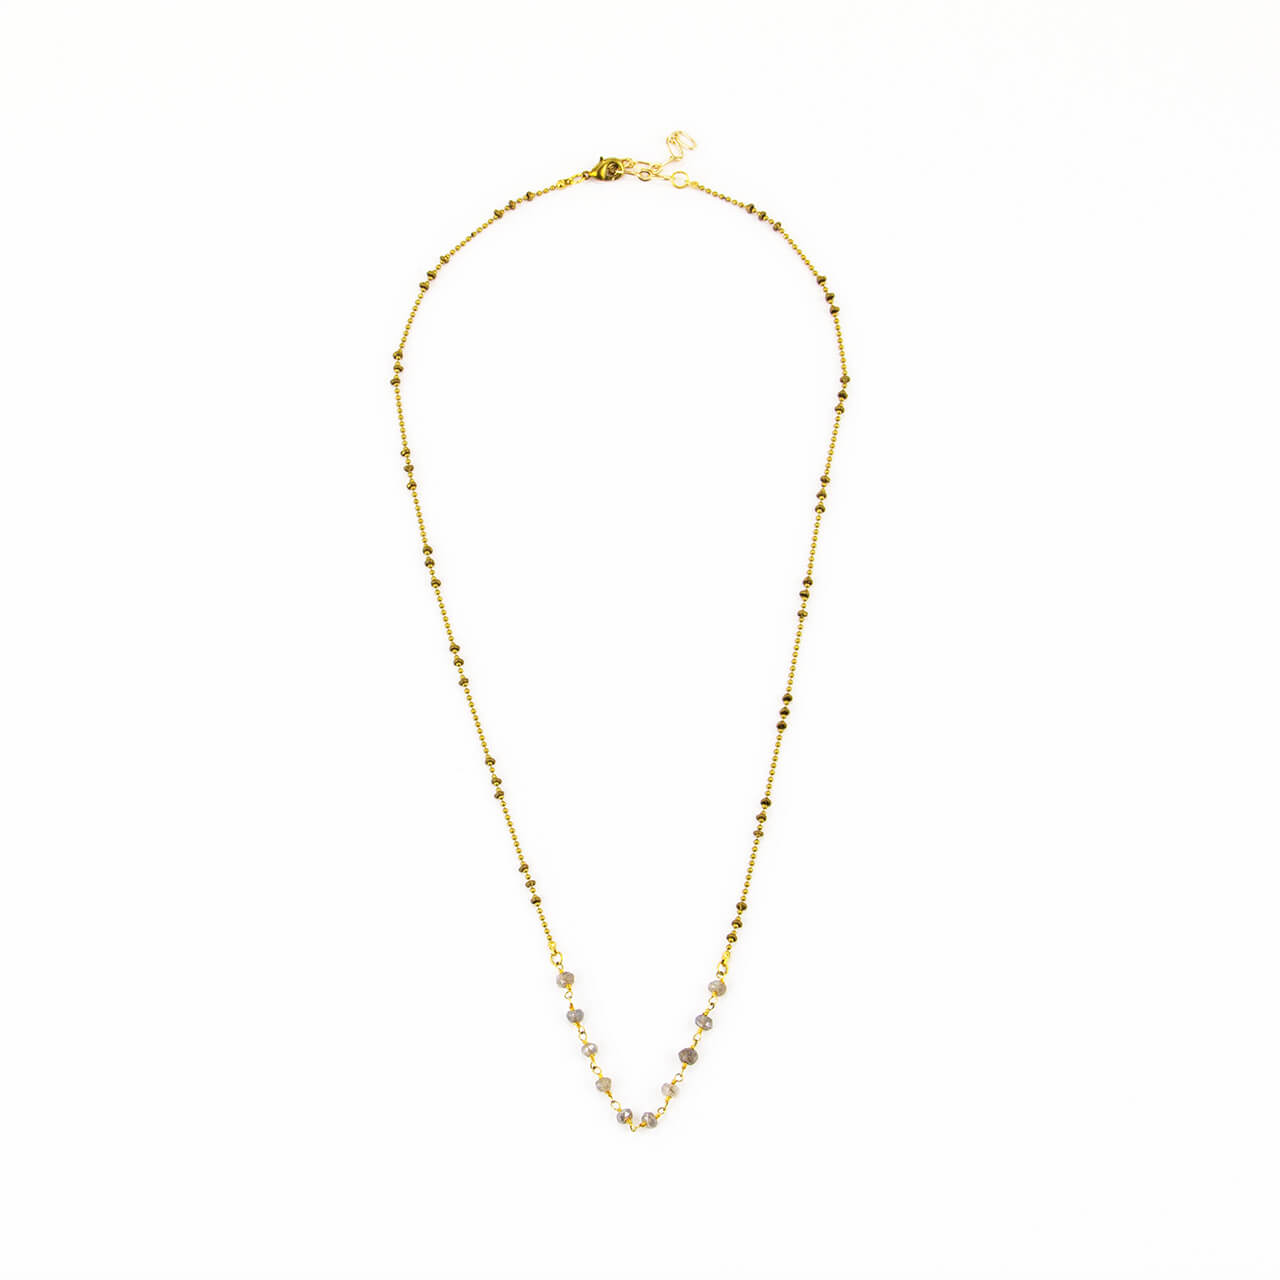 Eleanor Necklace: Simple Rosary Chain Necklace